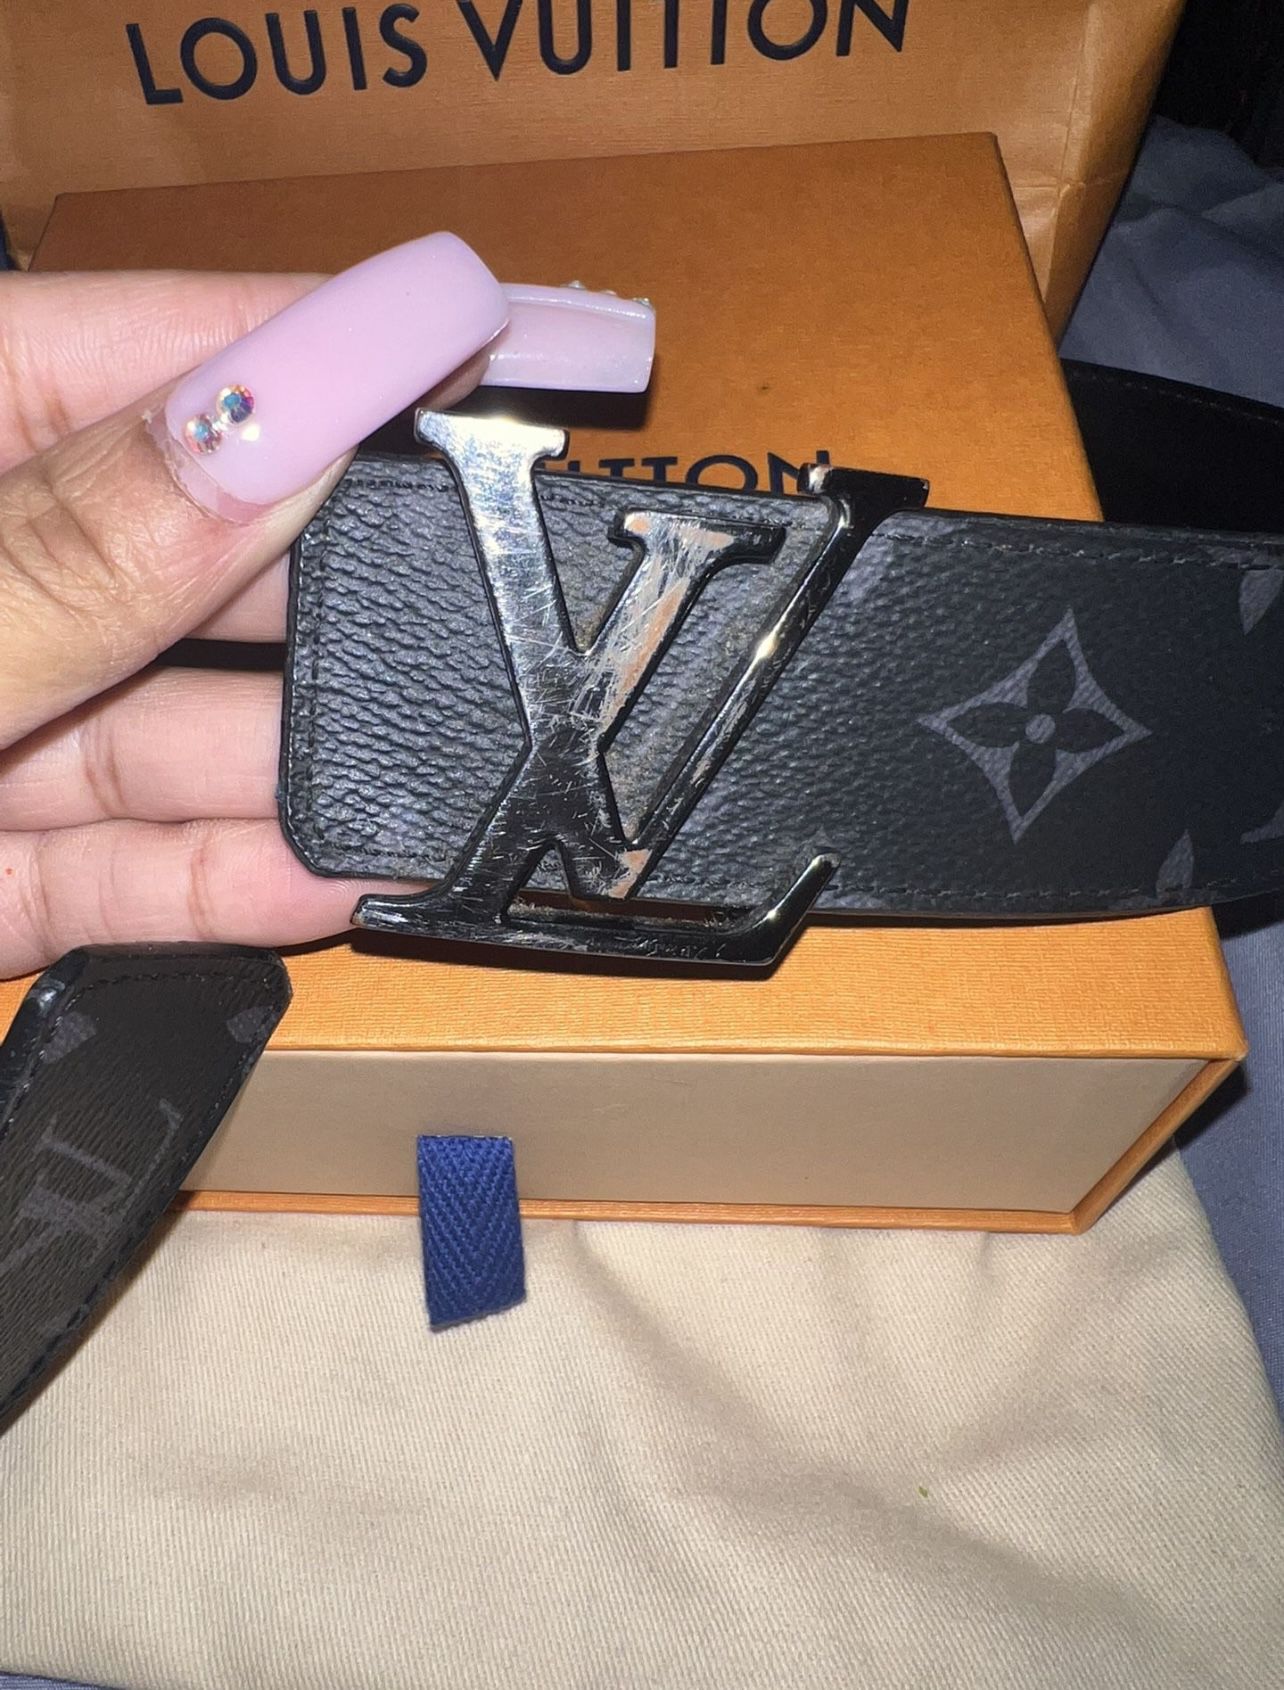 Louis Vuitton x Supreme Collab Limited Edition Belt For Sale for Sale in  Los Angeles, CA - OfferUp